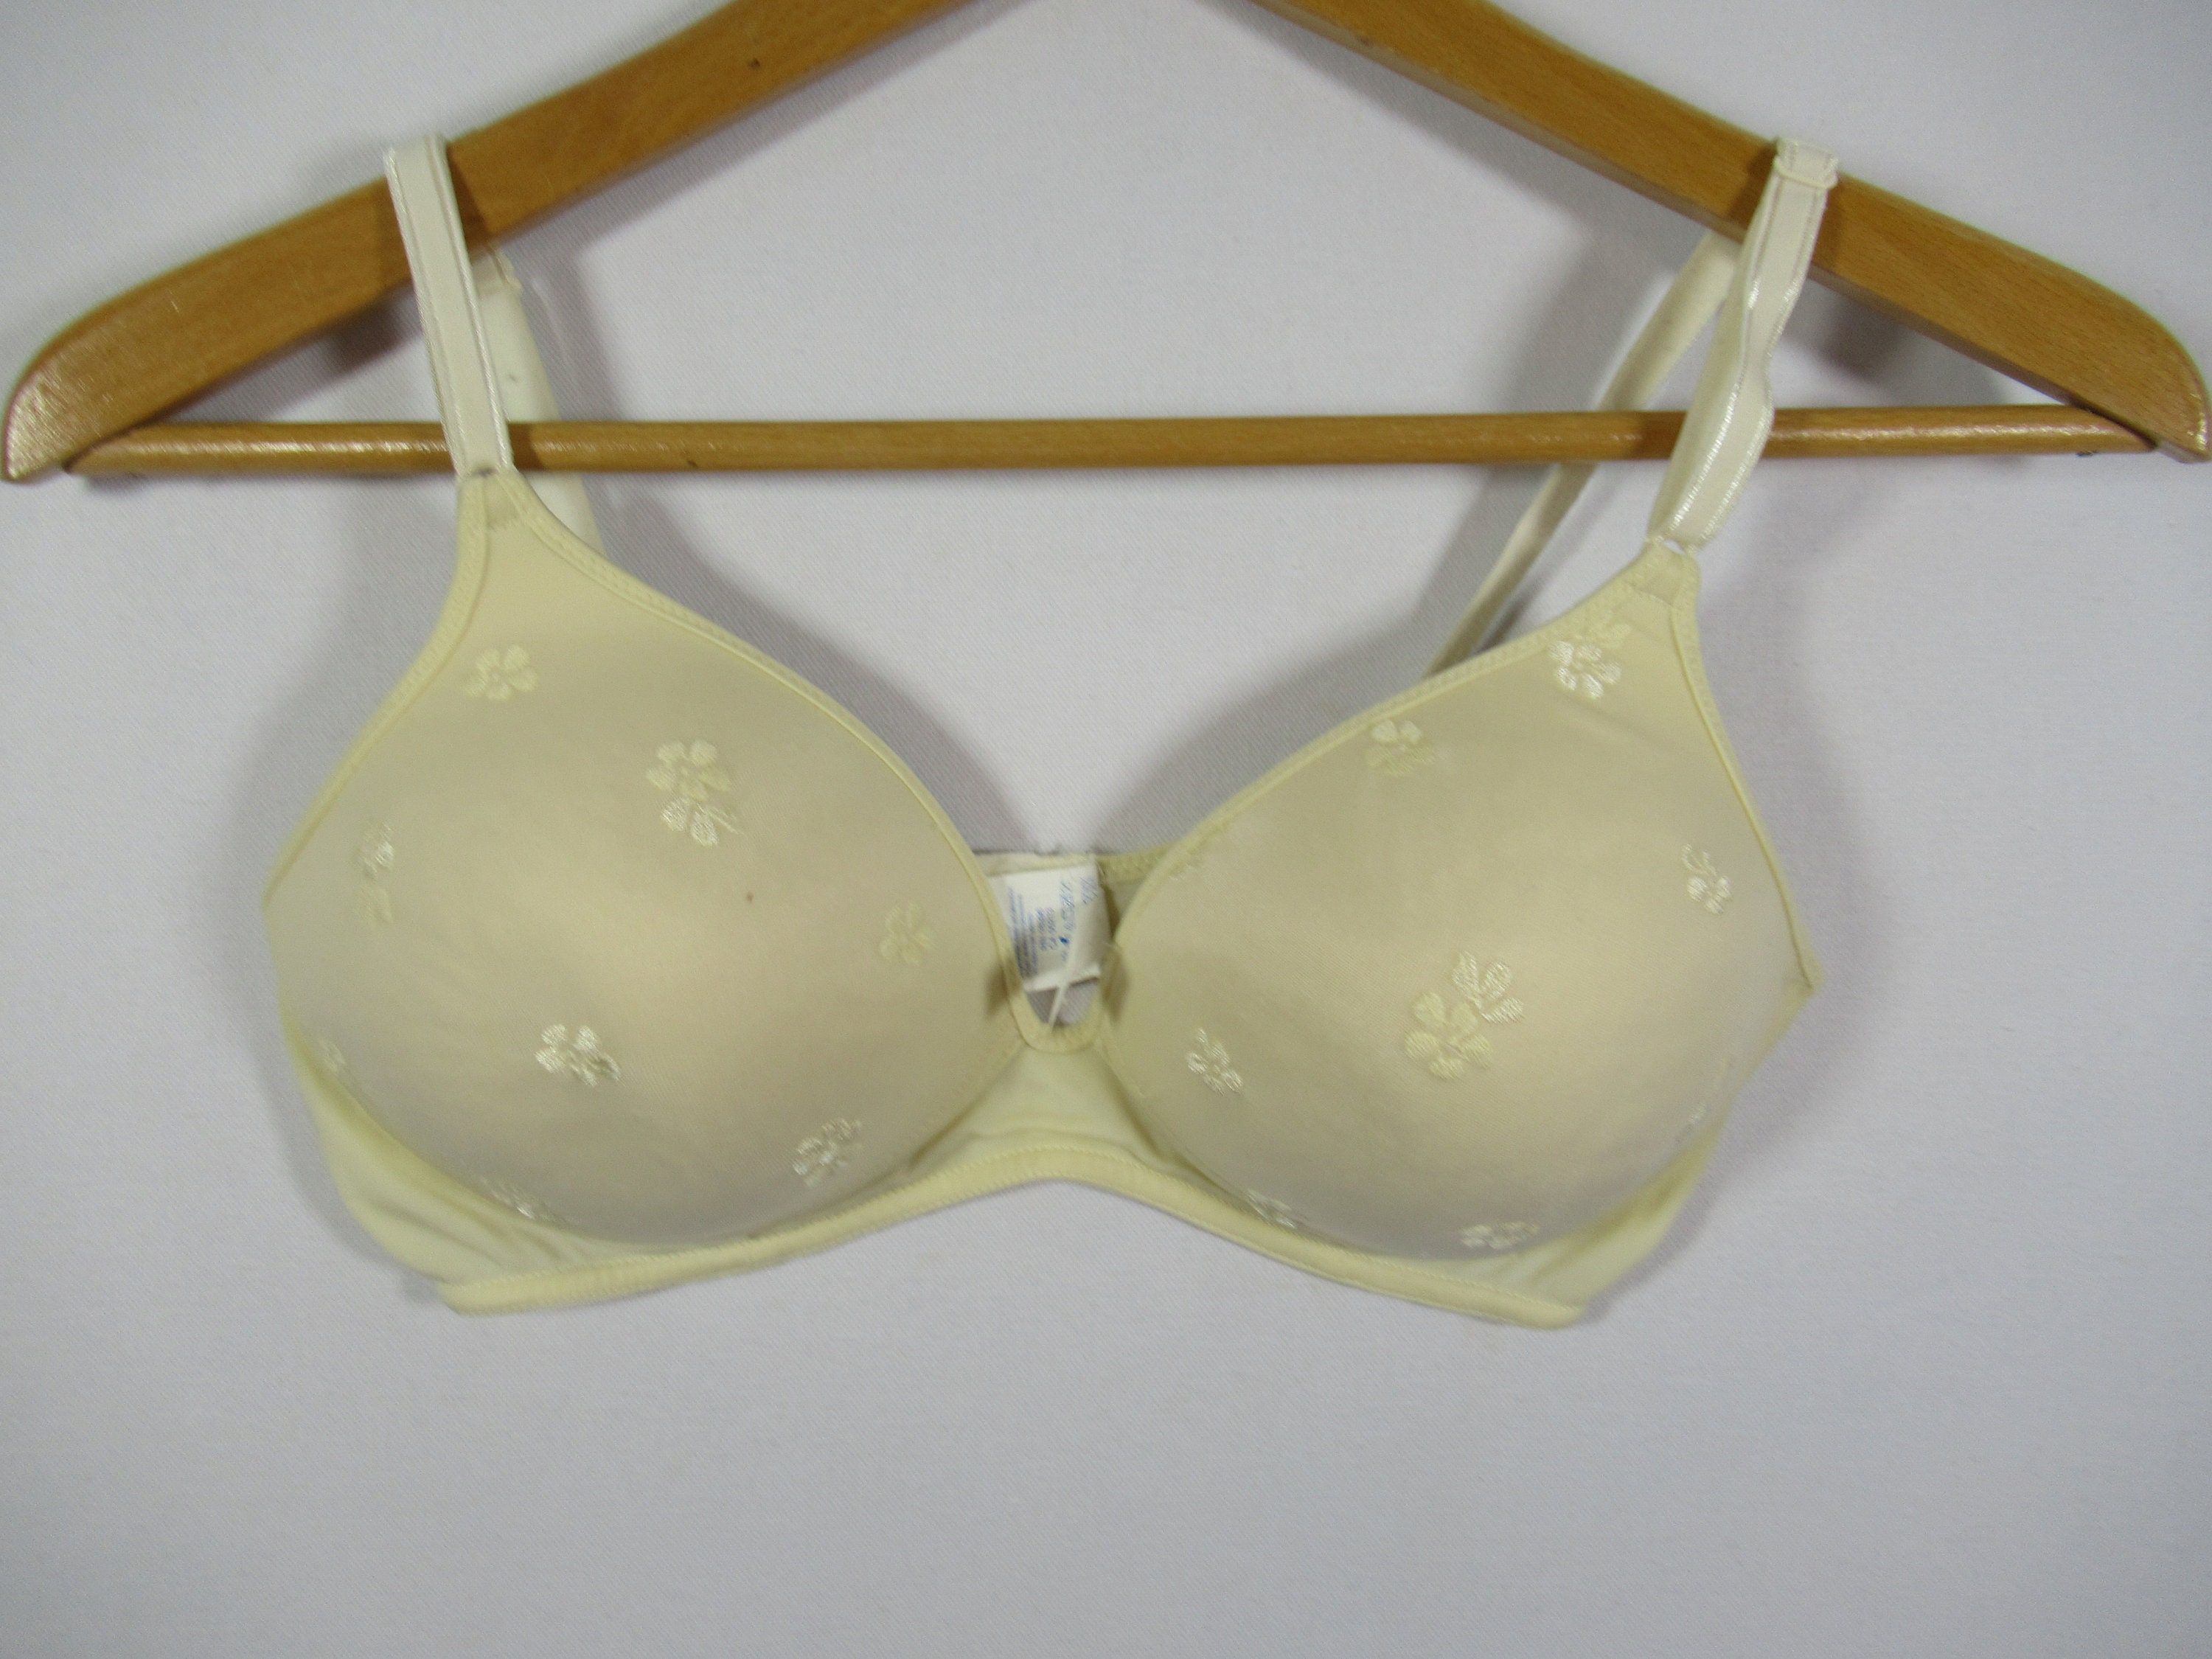 Vintage 1949 Warners 3-Way Sized Foundations & A'Lure Bras Full